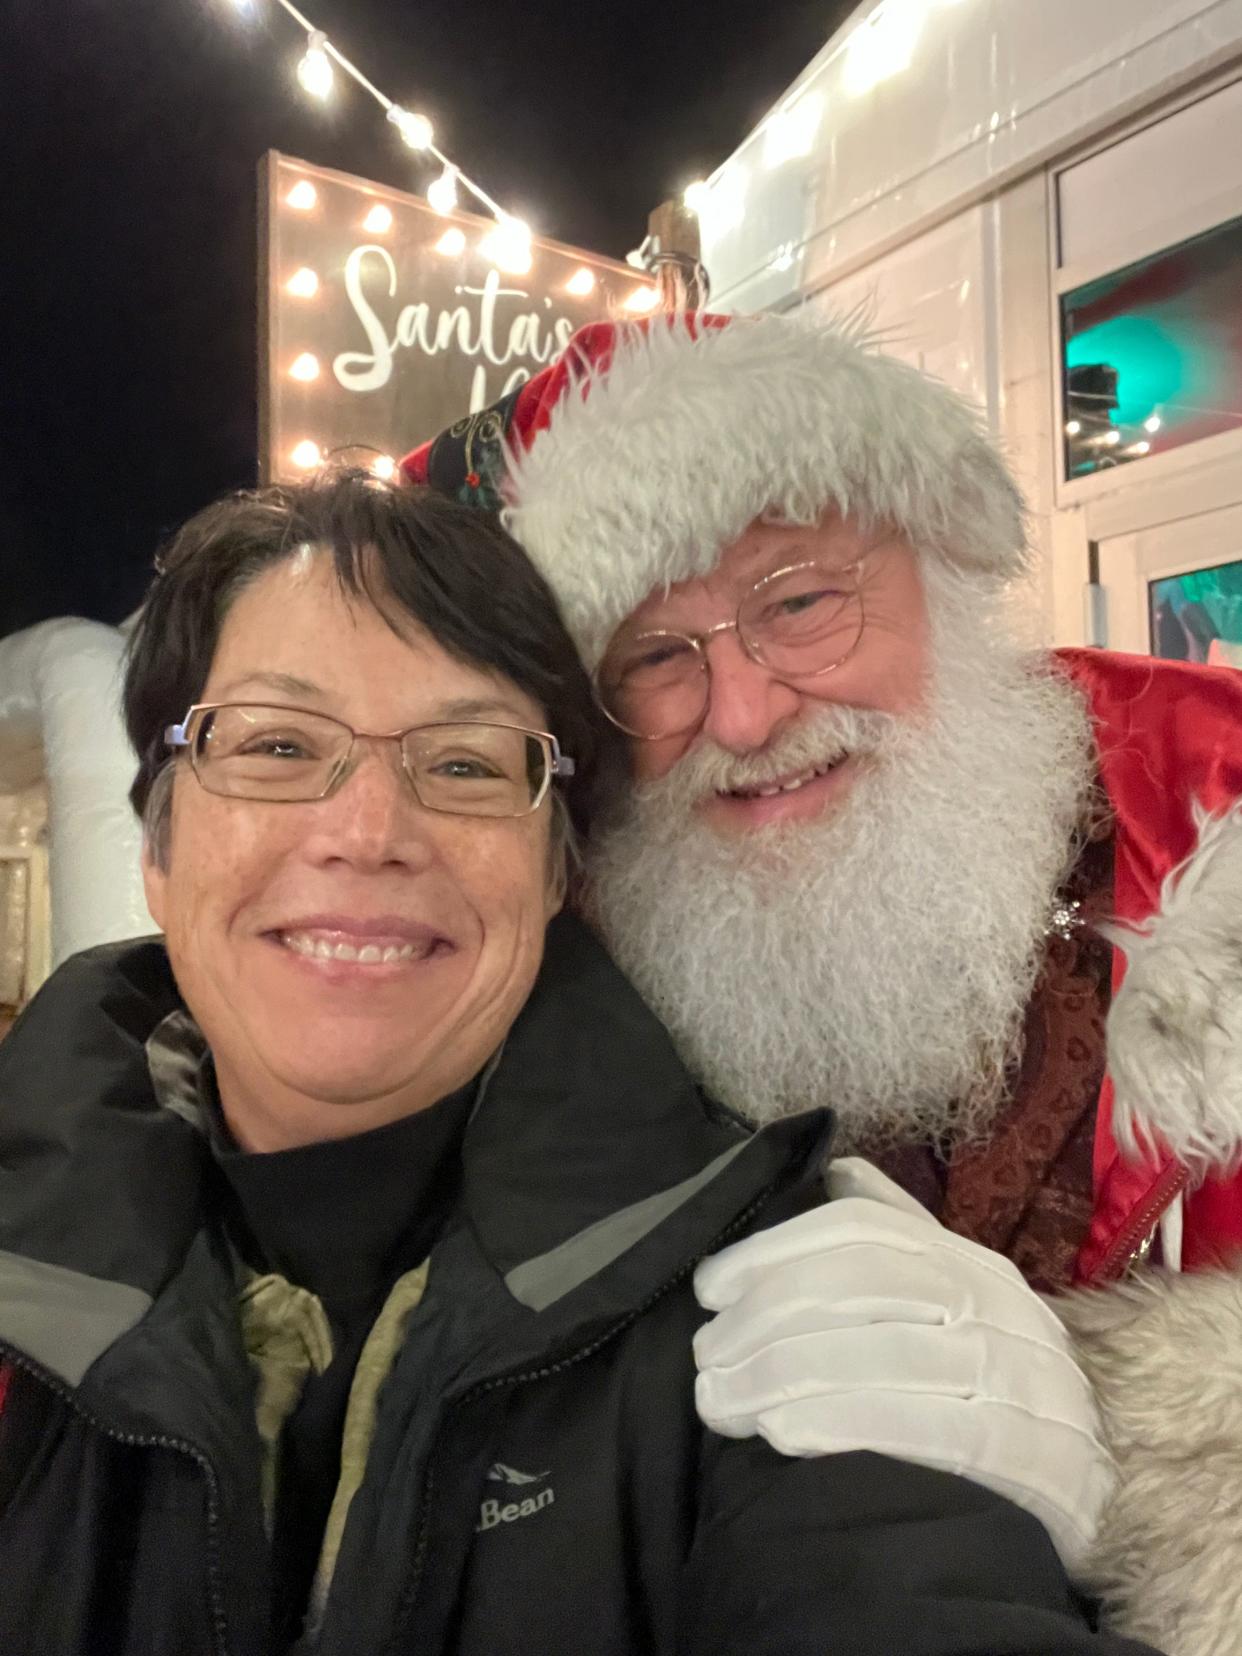 Tina MacIntyre-Yee takes a selfie with Santa Claus after spying him outside his tent at Roc Holiday Village.